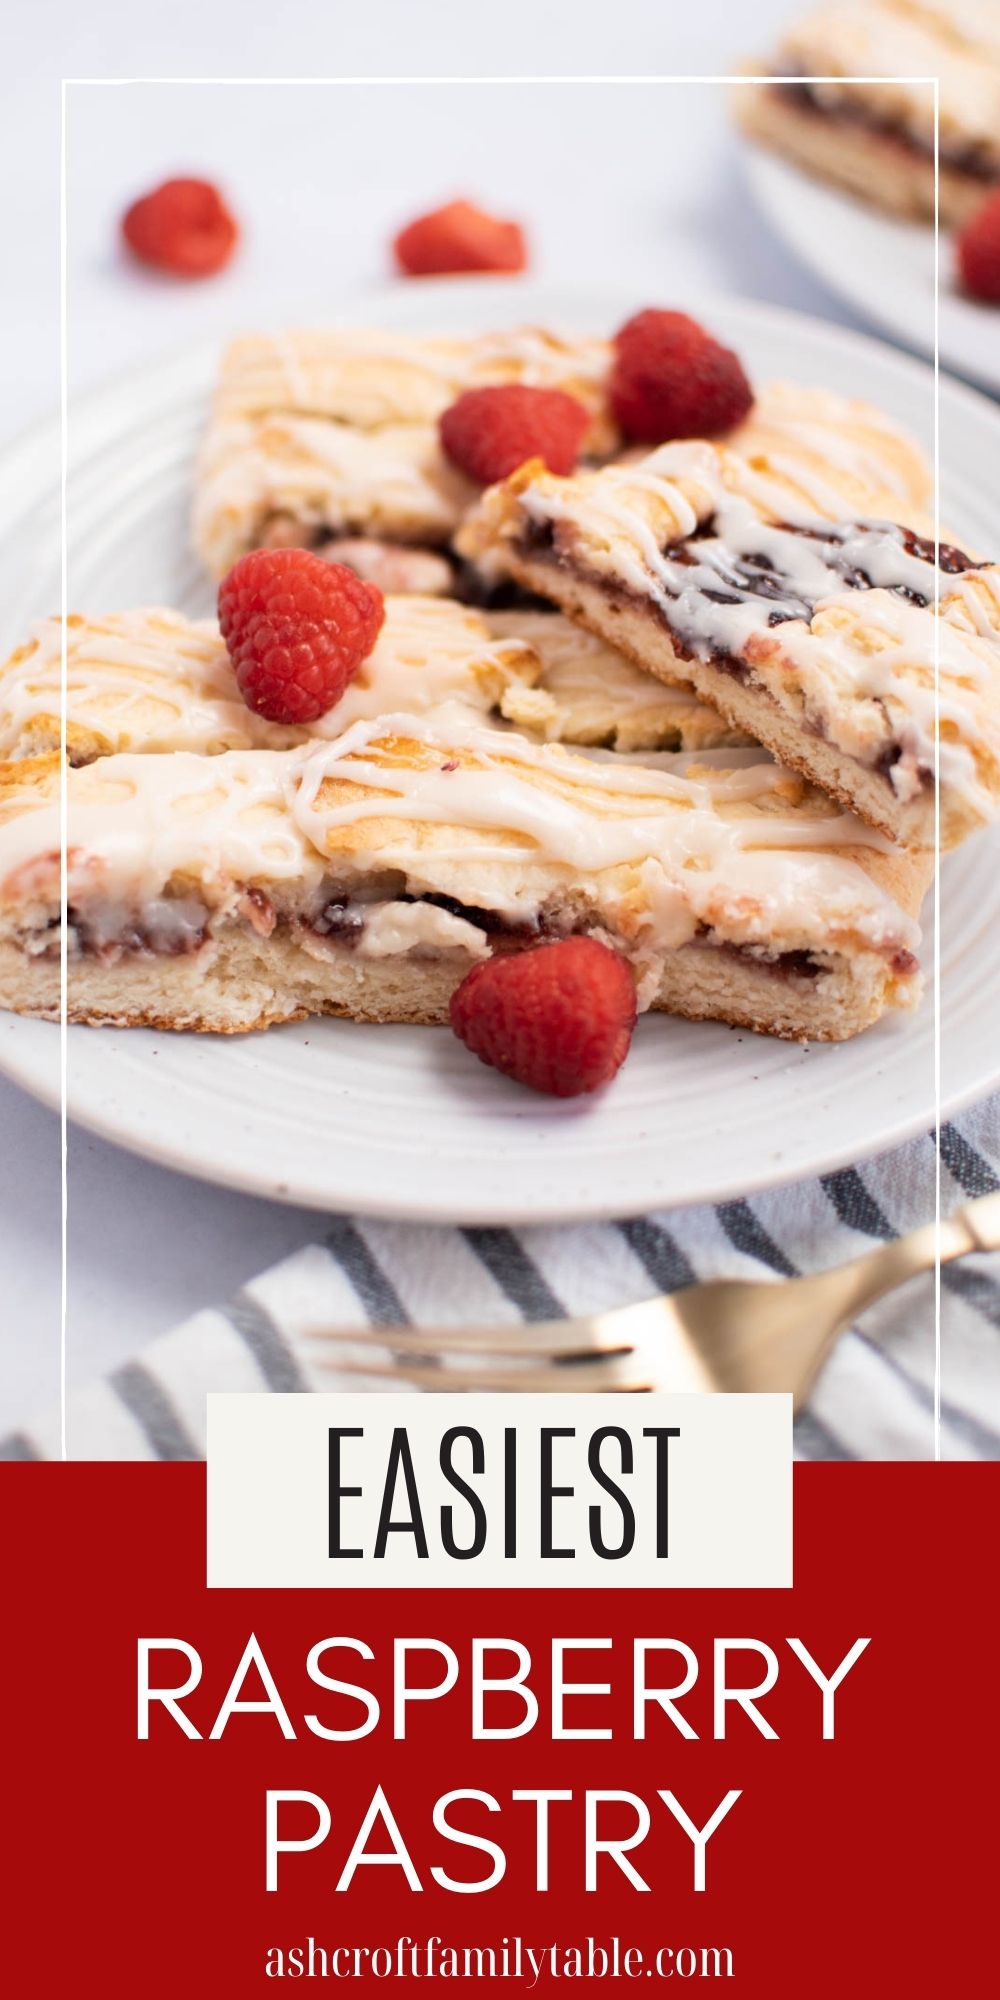 Pinterest graphic with text and photo of raspberry pastry pieces on white plate.